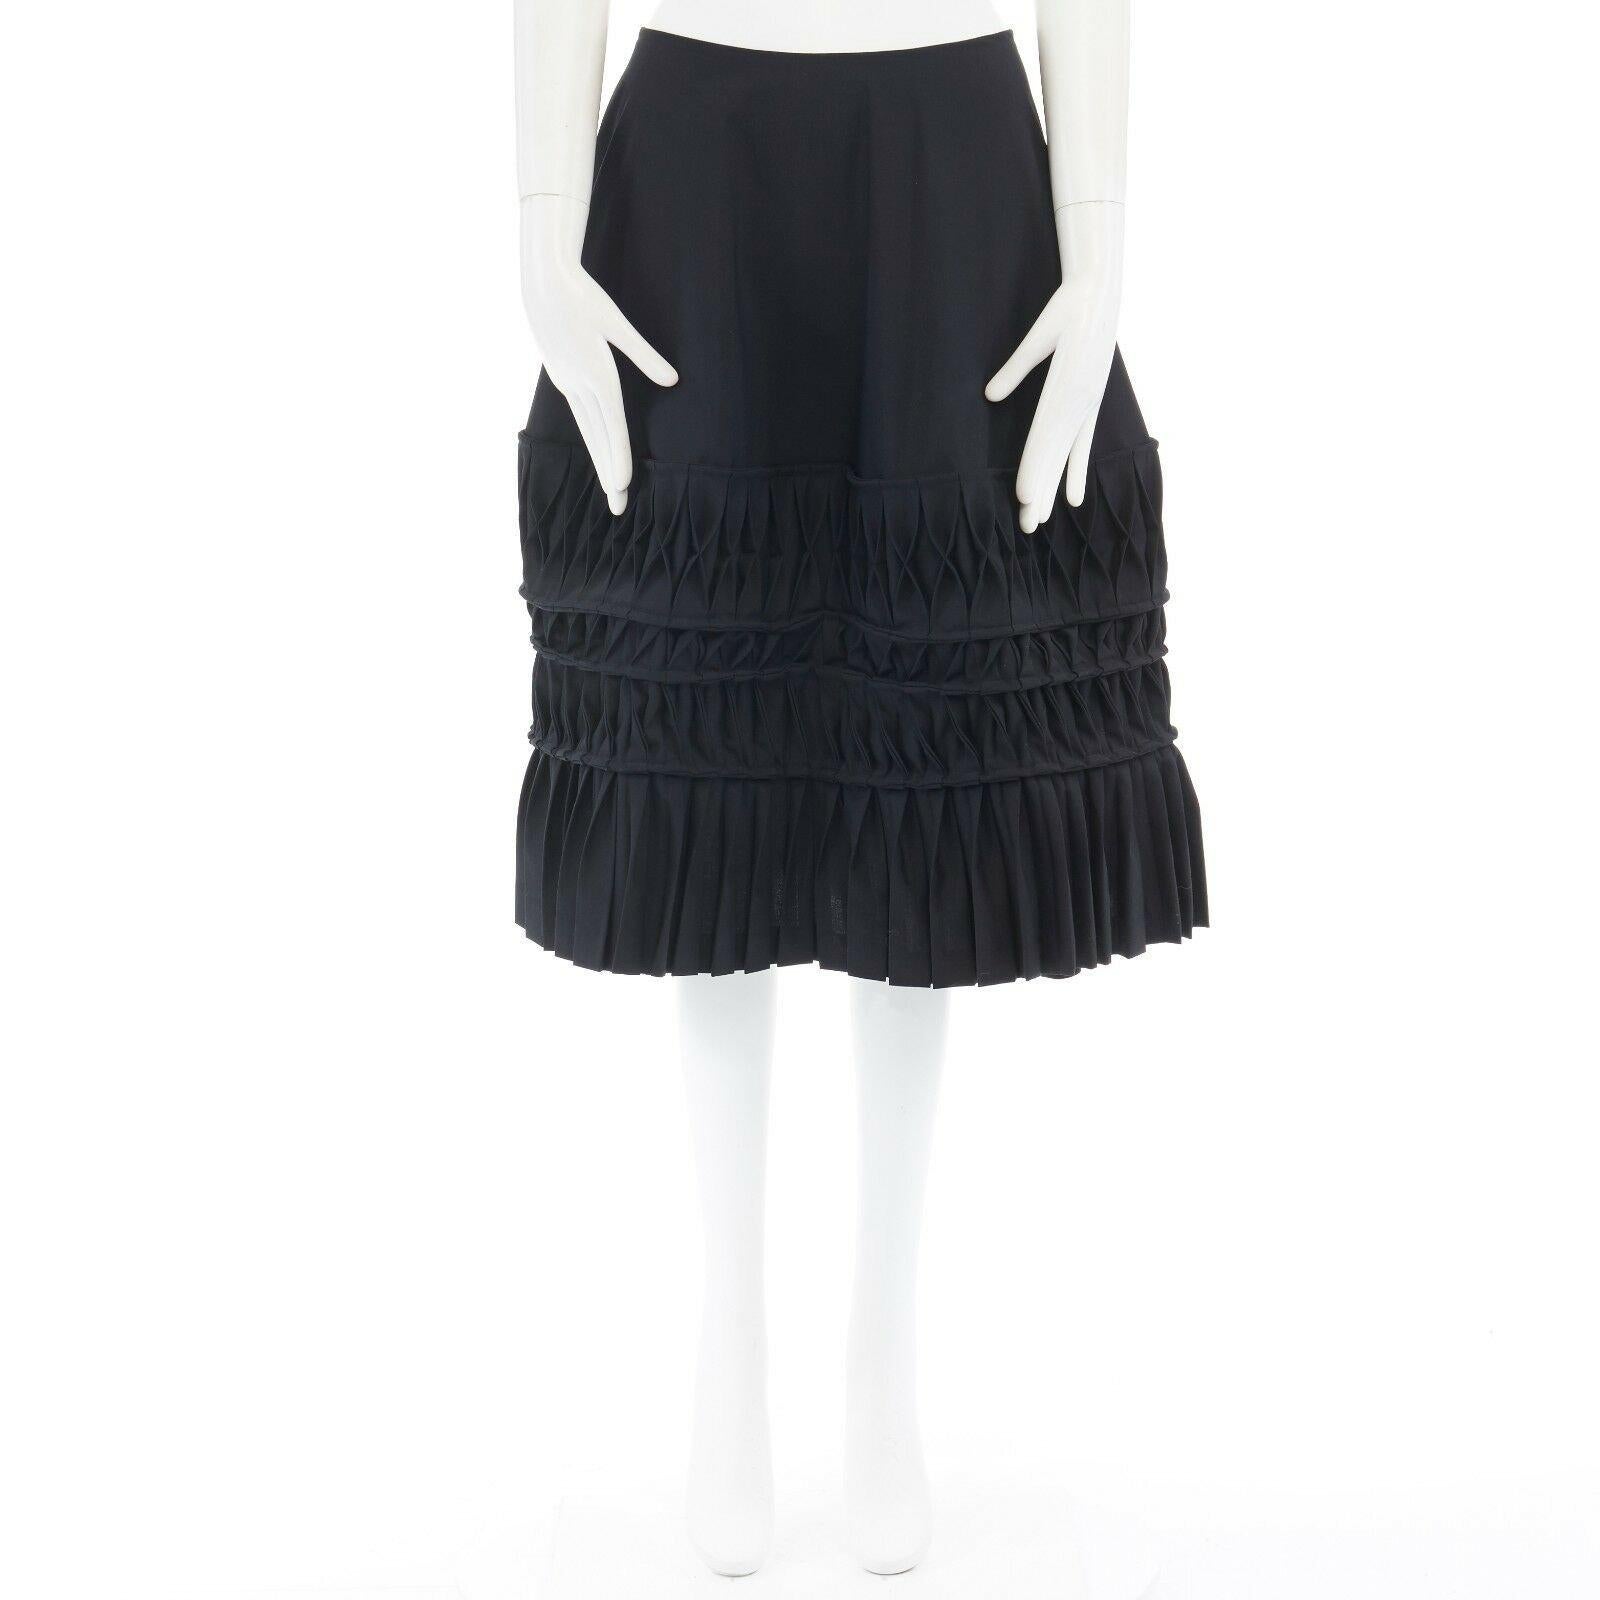 JUNYA WATANABE AD1998 black wool blend origami pleated front wrap tie skirt 
Reference: CRTI/A00139 
Brand: Junya Watanabe 
Designer: Junya Watanabe Collection: AD1998 
Material: Wool 
Color: Black 
Pattern: Solid 
Extra Detail: FROM THE AD1998